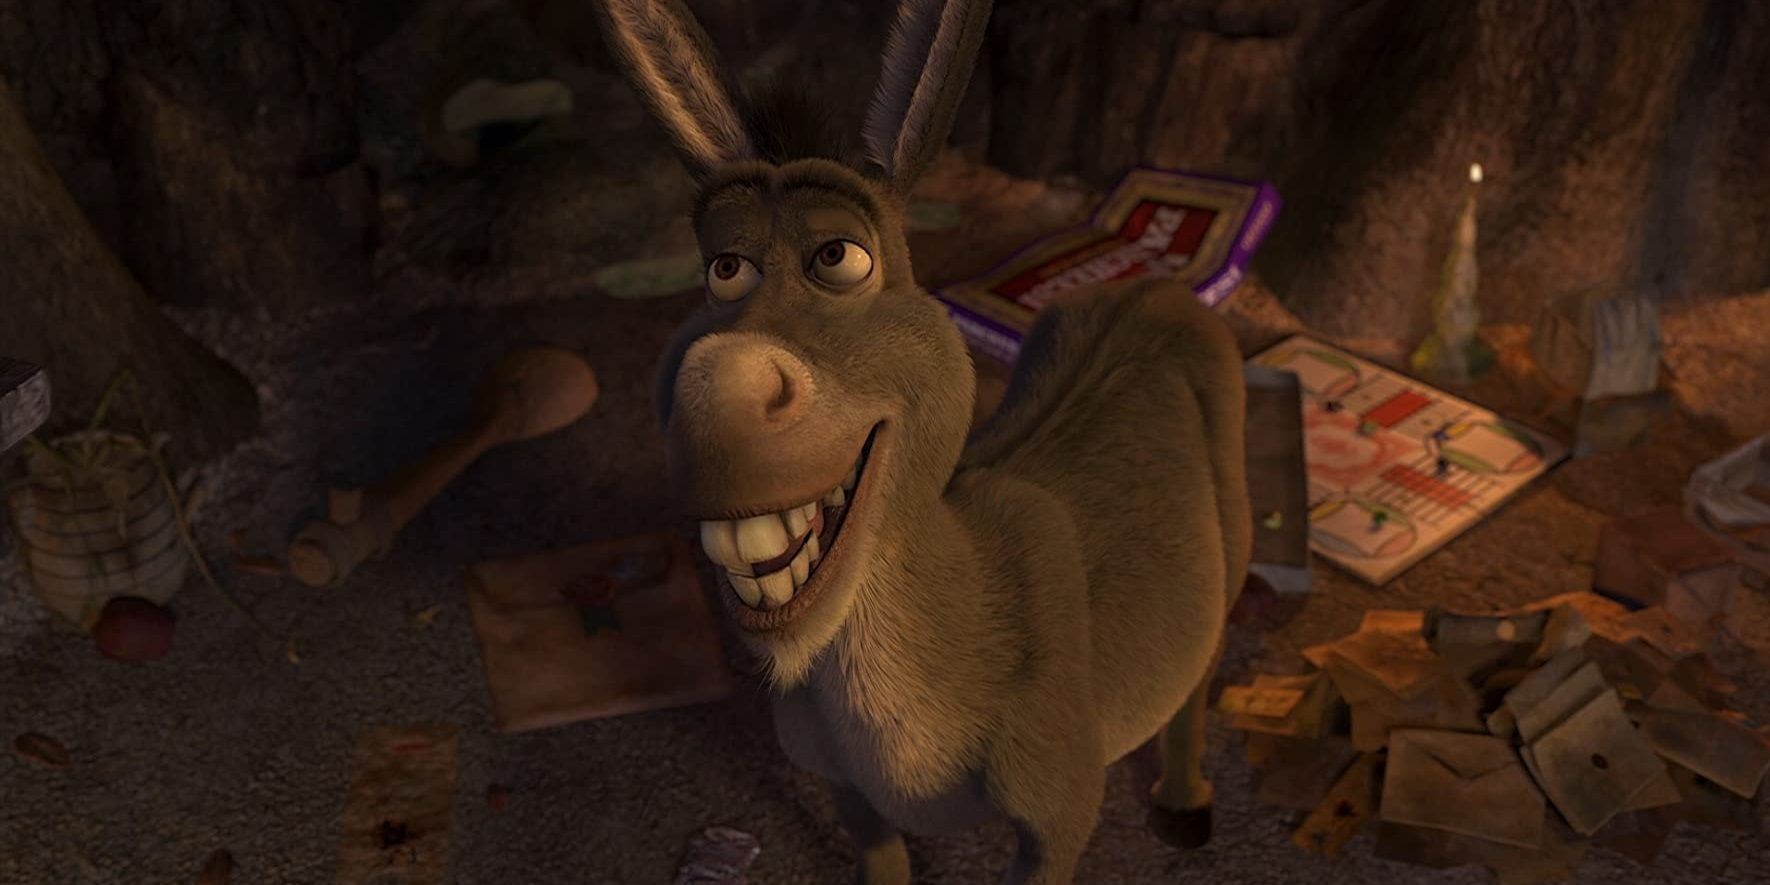 5 Characters From Shrek We’d Totally Hang Out With (& 5 Who Need To Get Out Of Our Swamp)